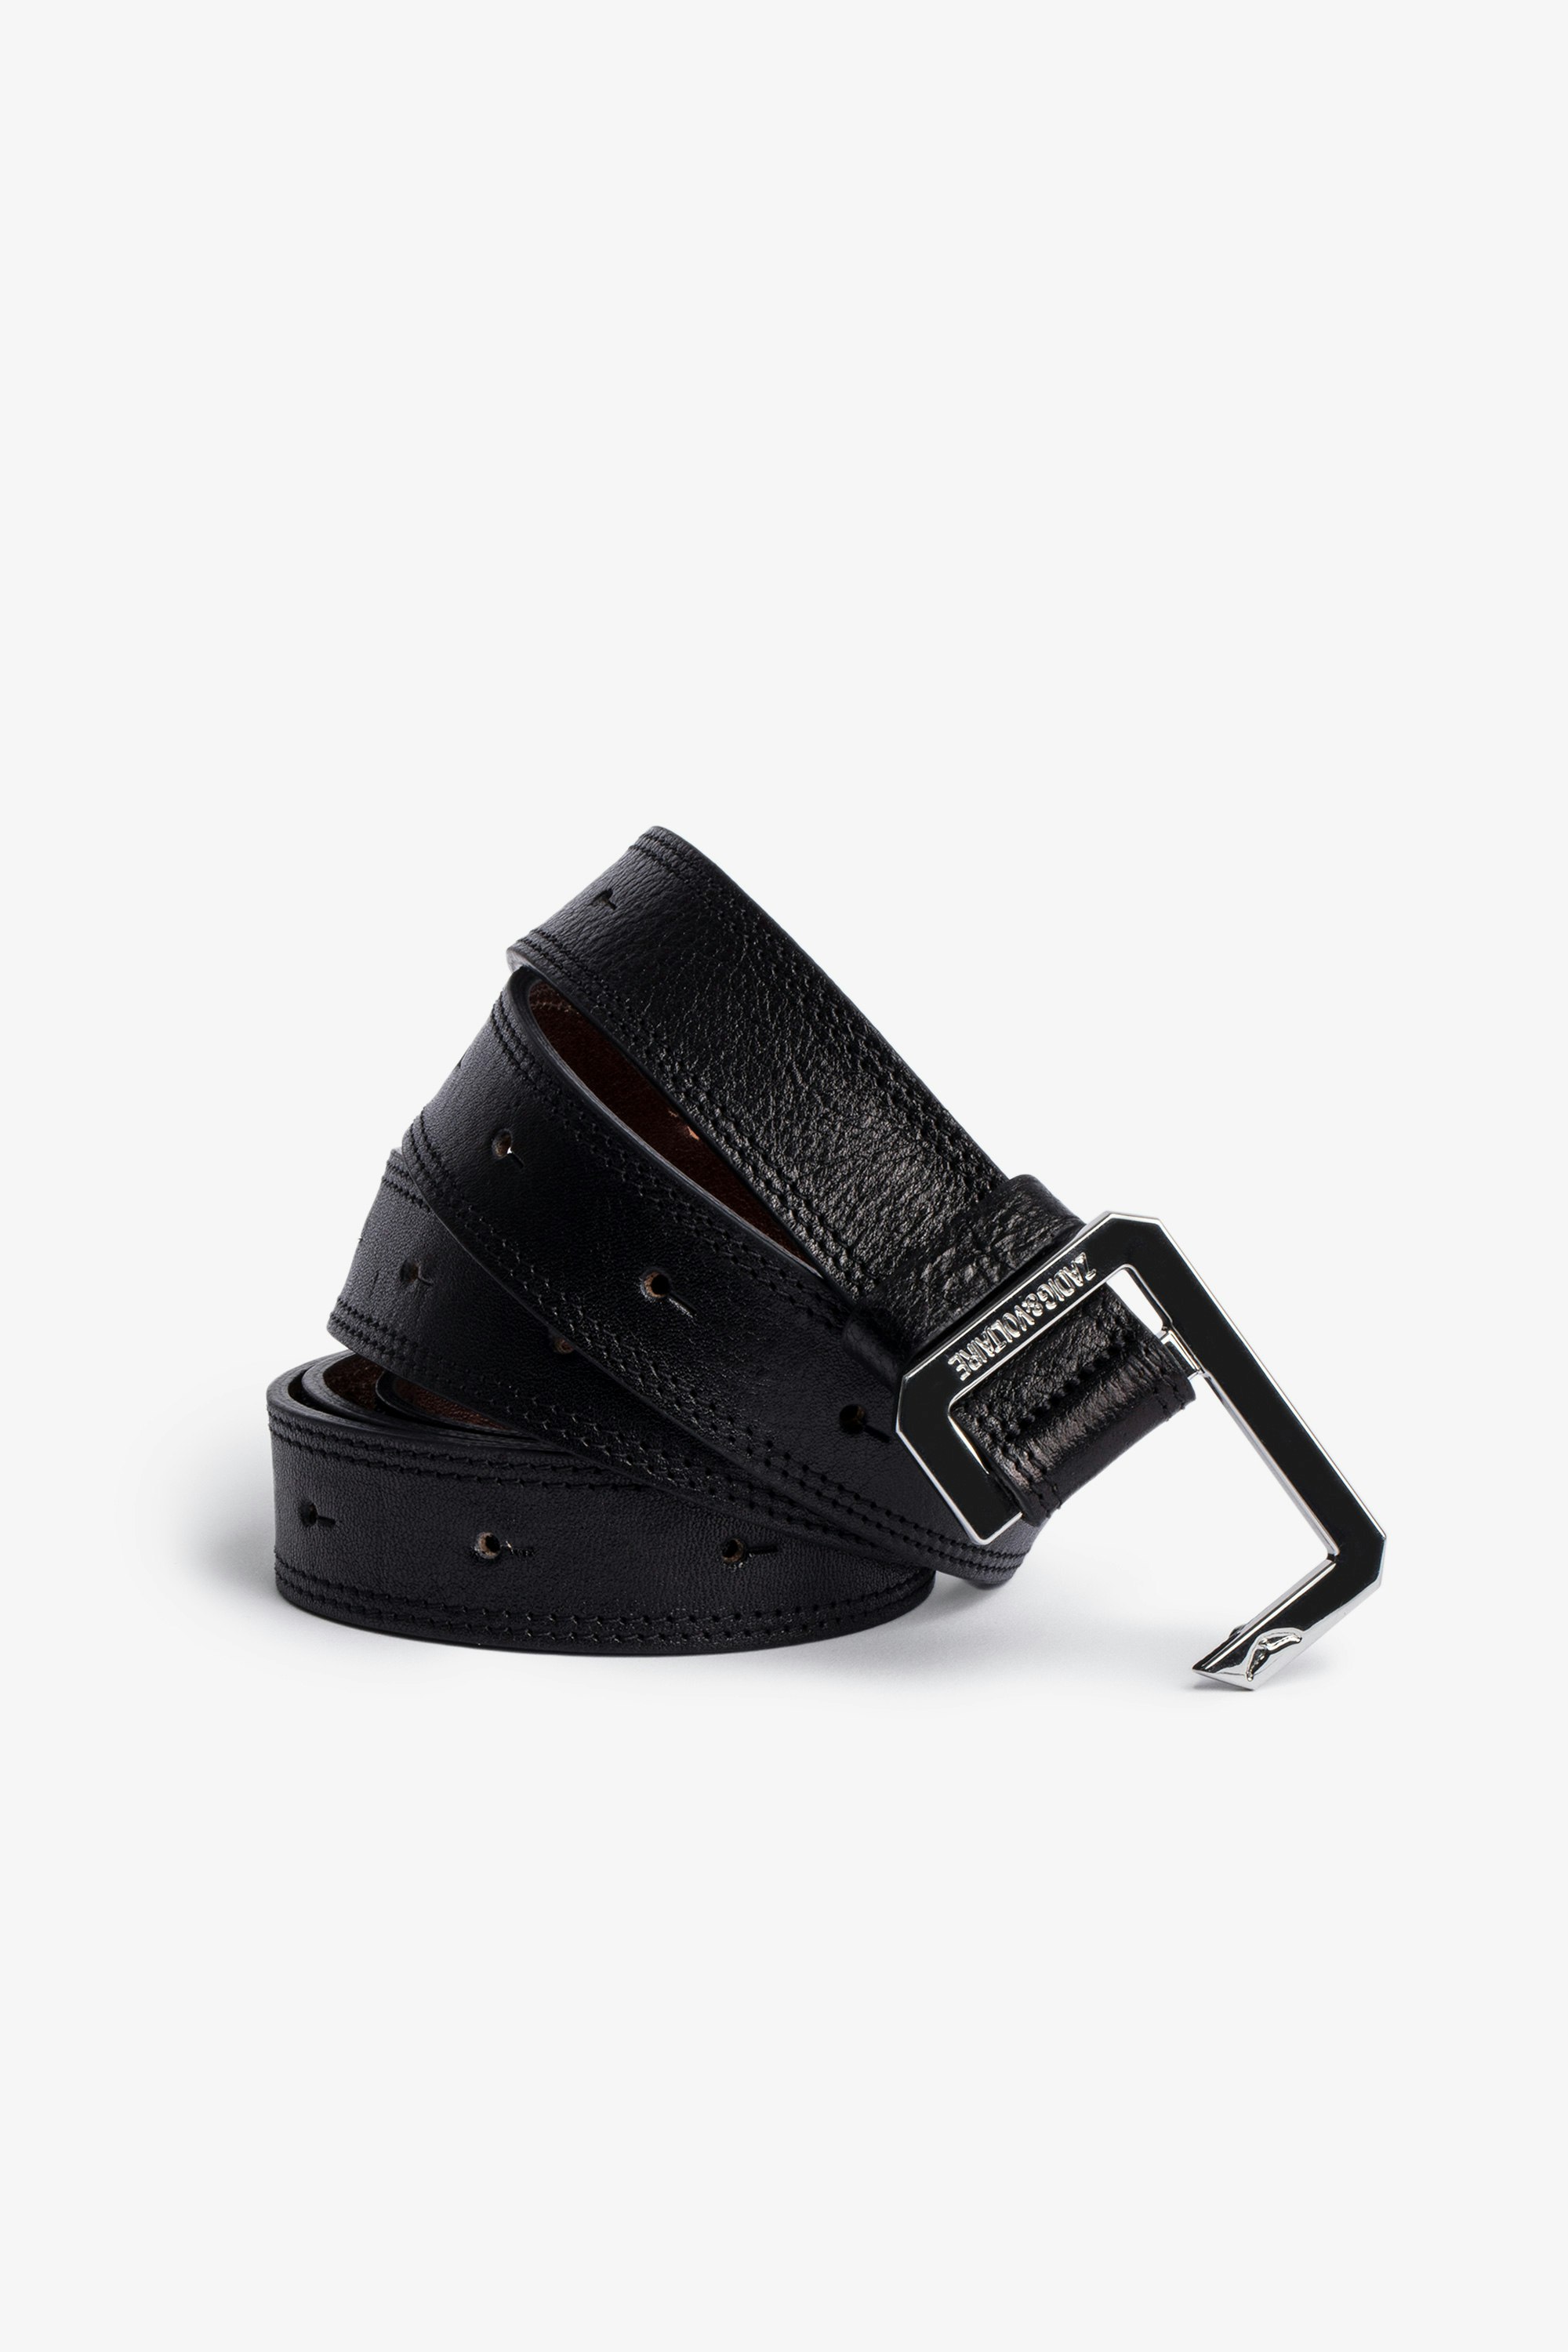 Le Cecilia Belt Leather Women's black leather belt with C-shaped buckle